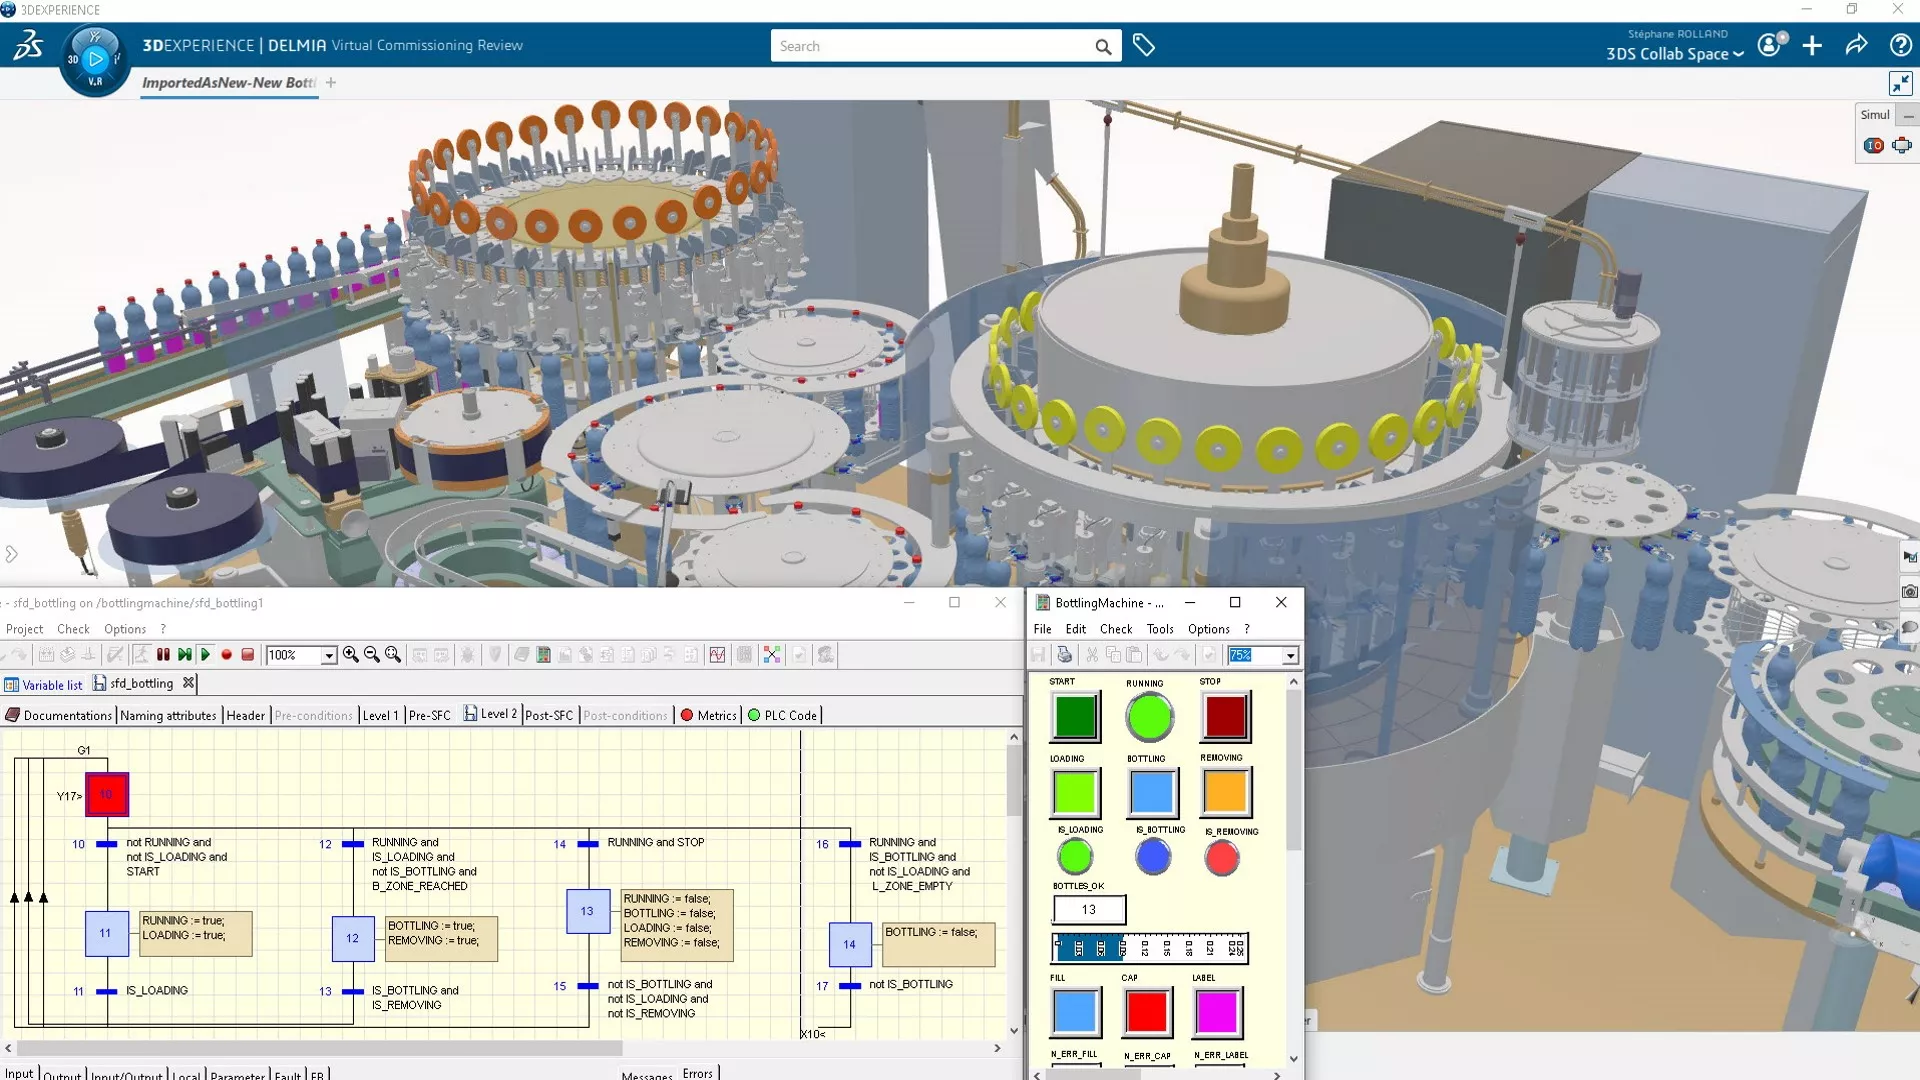 3DEXPERIENCE VIRTUAL FACTORY enables a powerful virtual commissioning process.